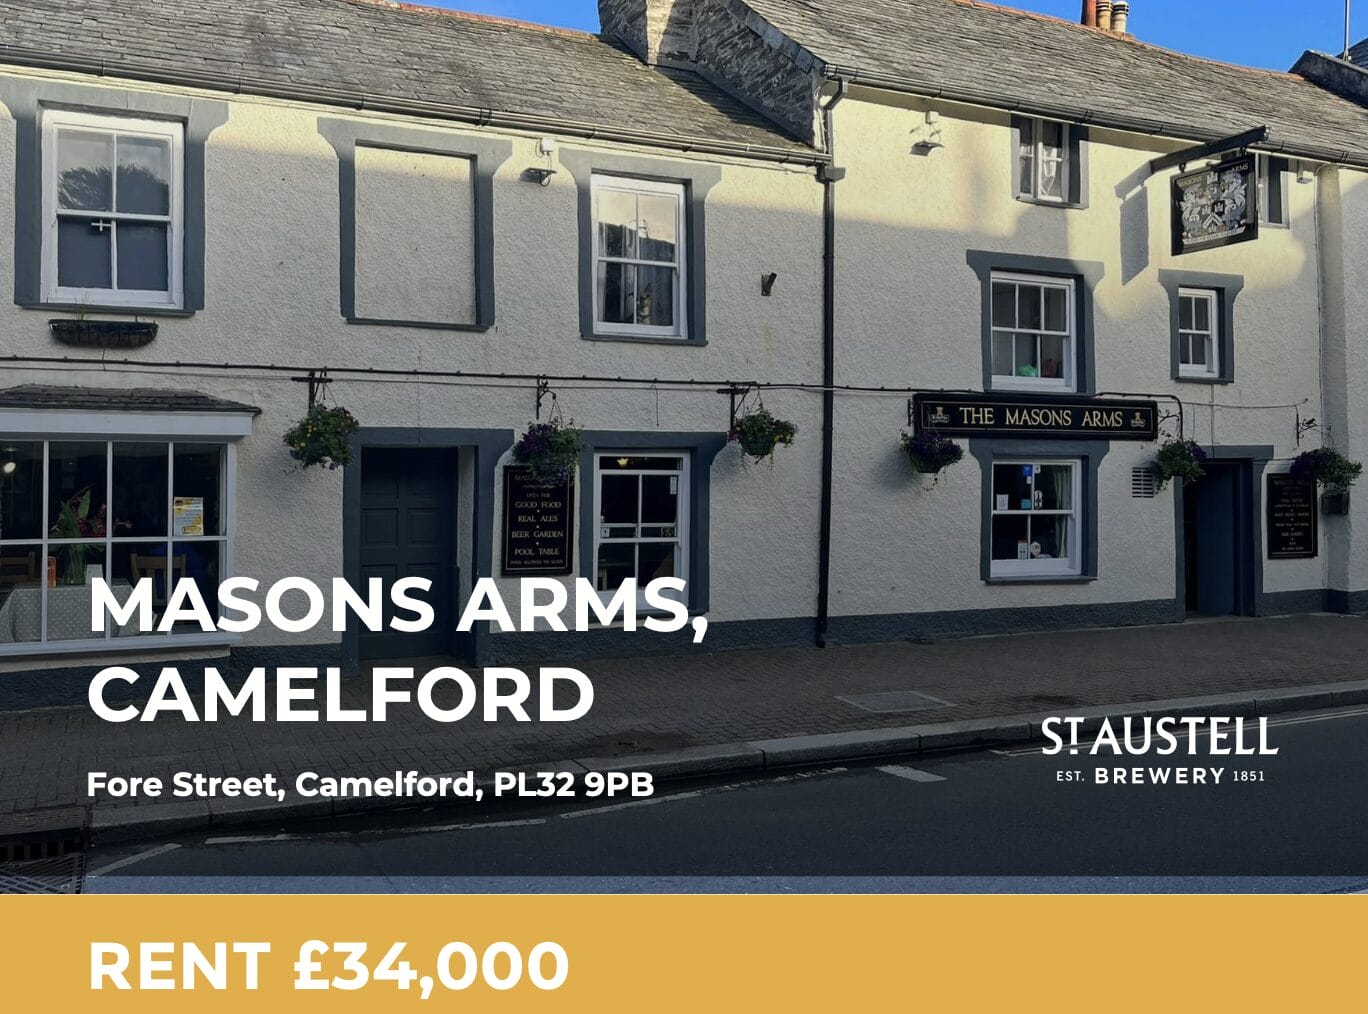 Lease A Pub In Camelford - Run The Masons Arms !